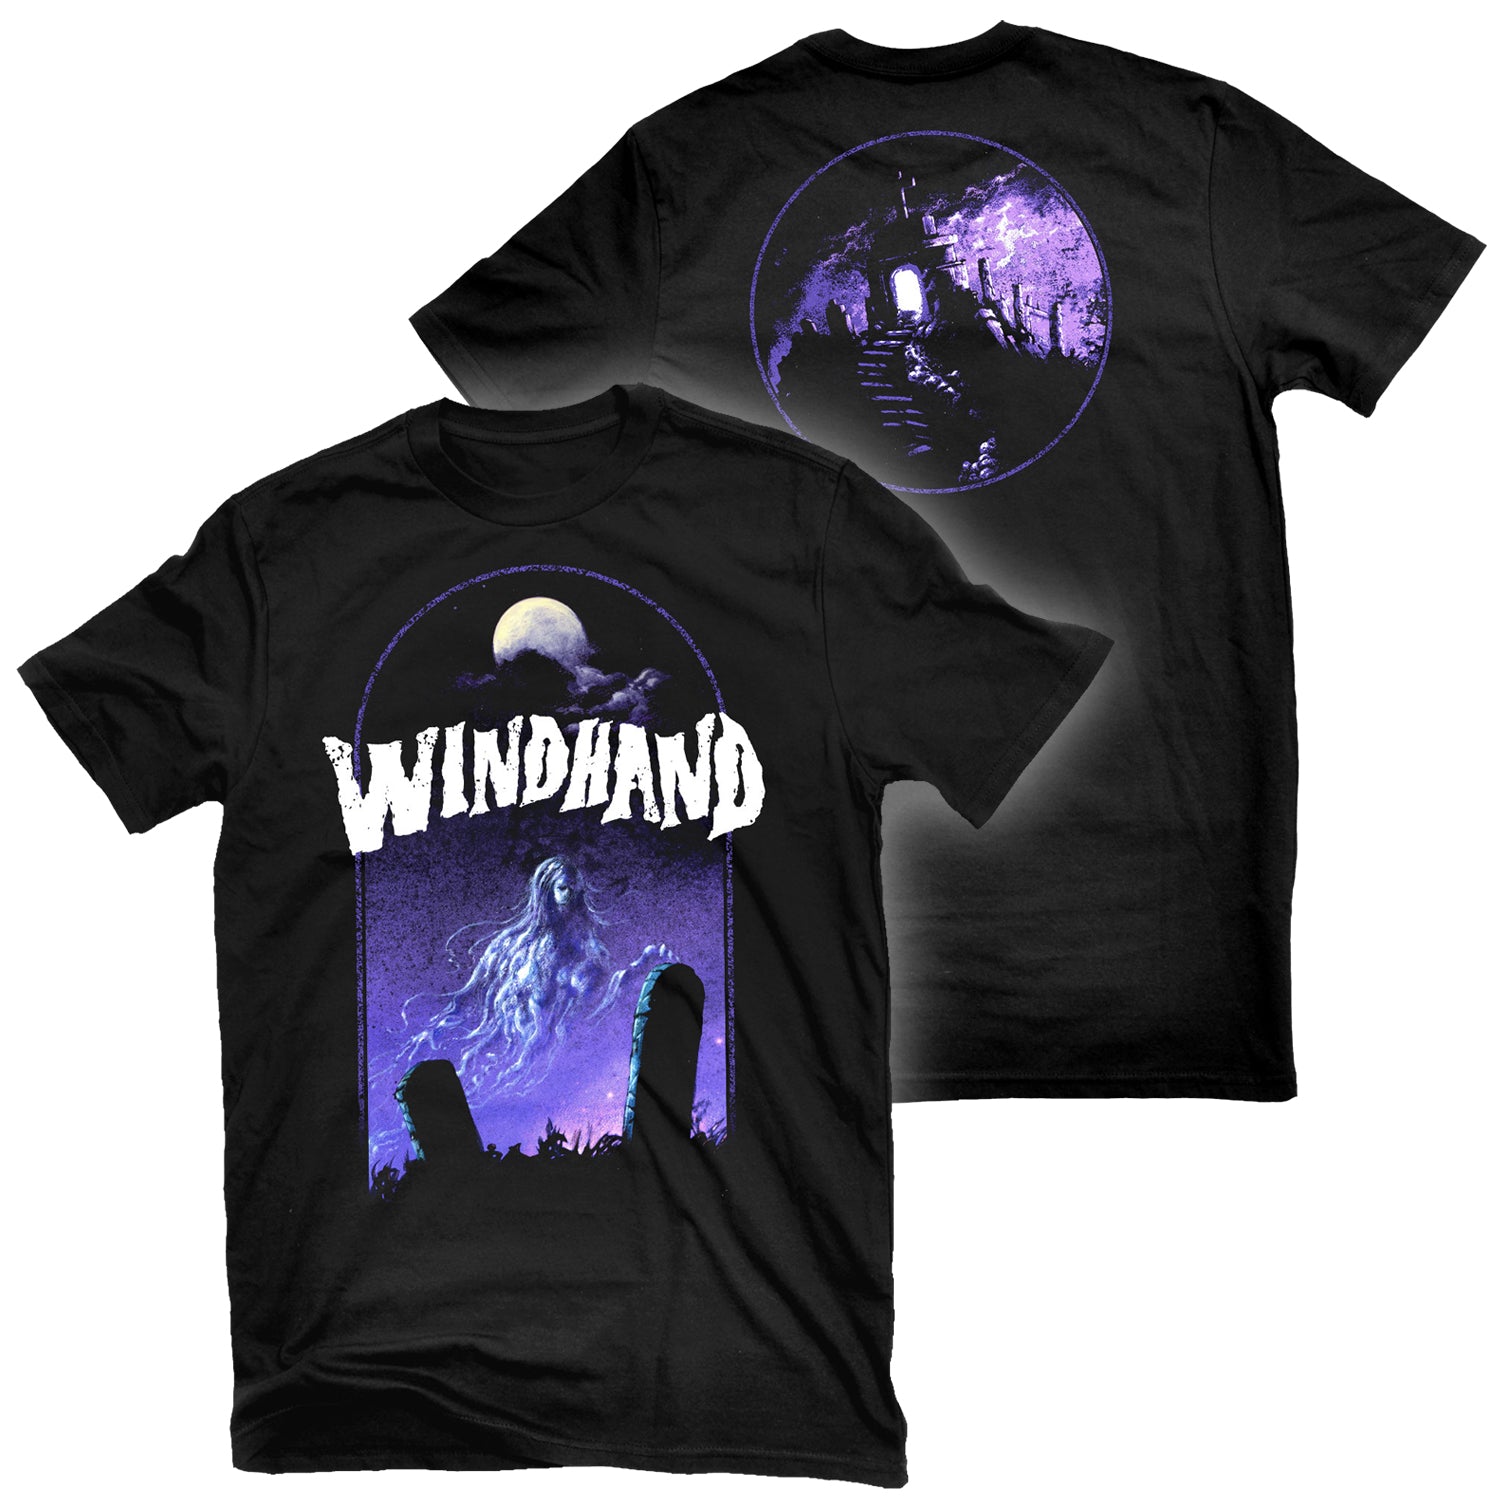 Windhand "Windhand (Reissue)" T-Shirt